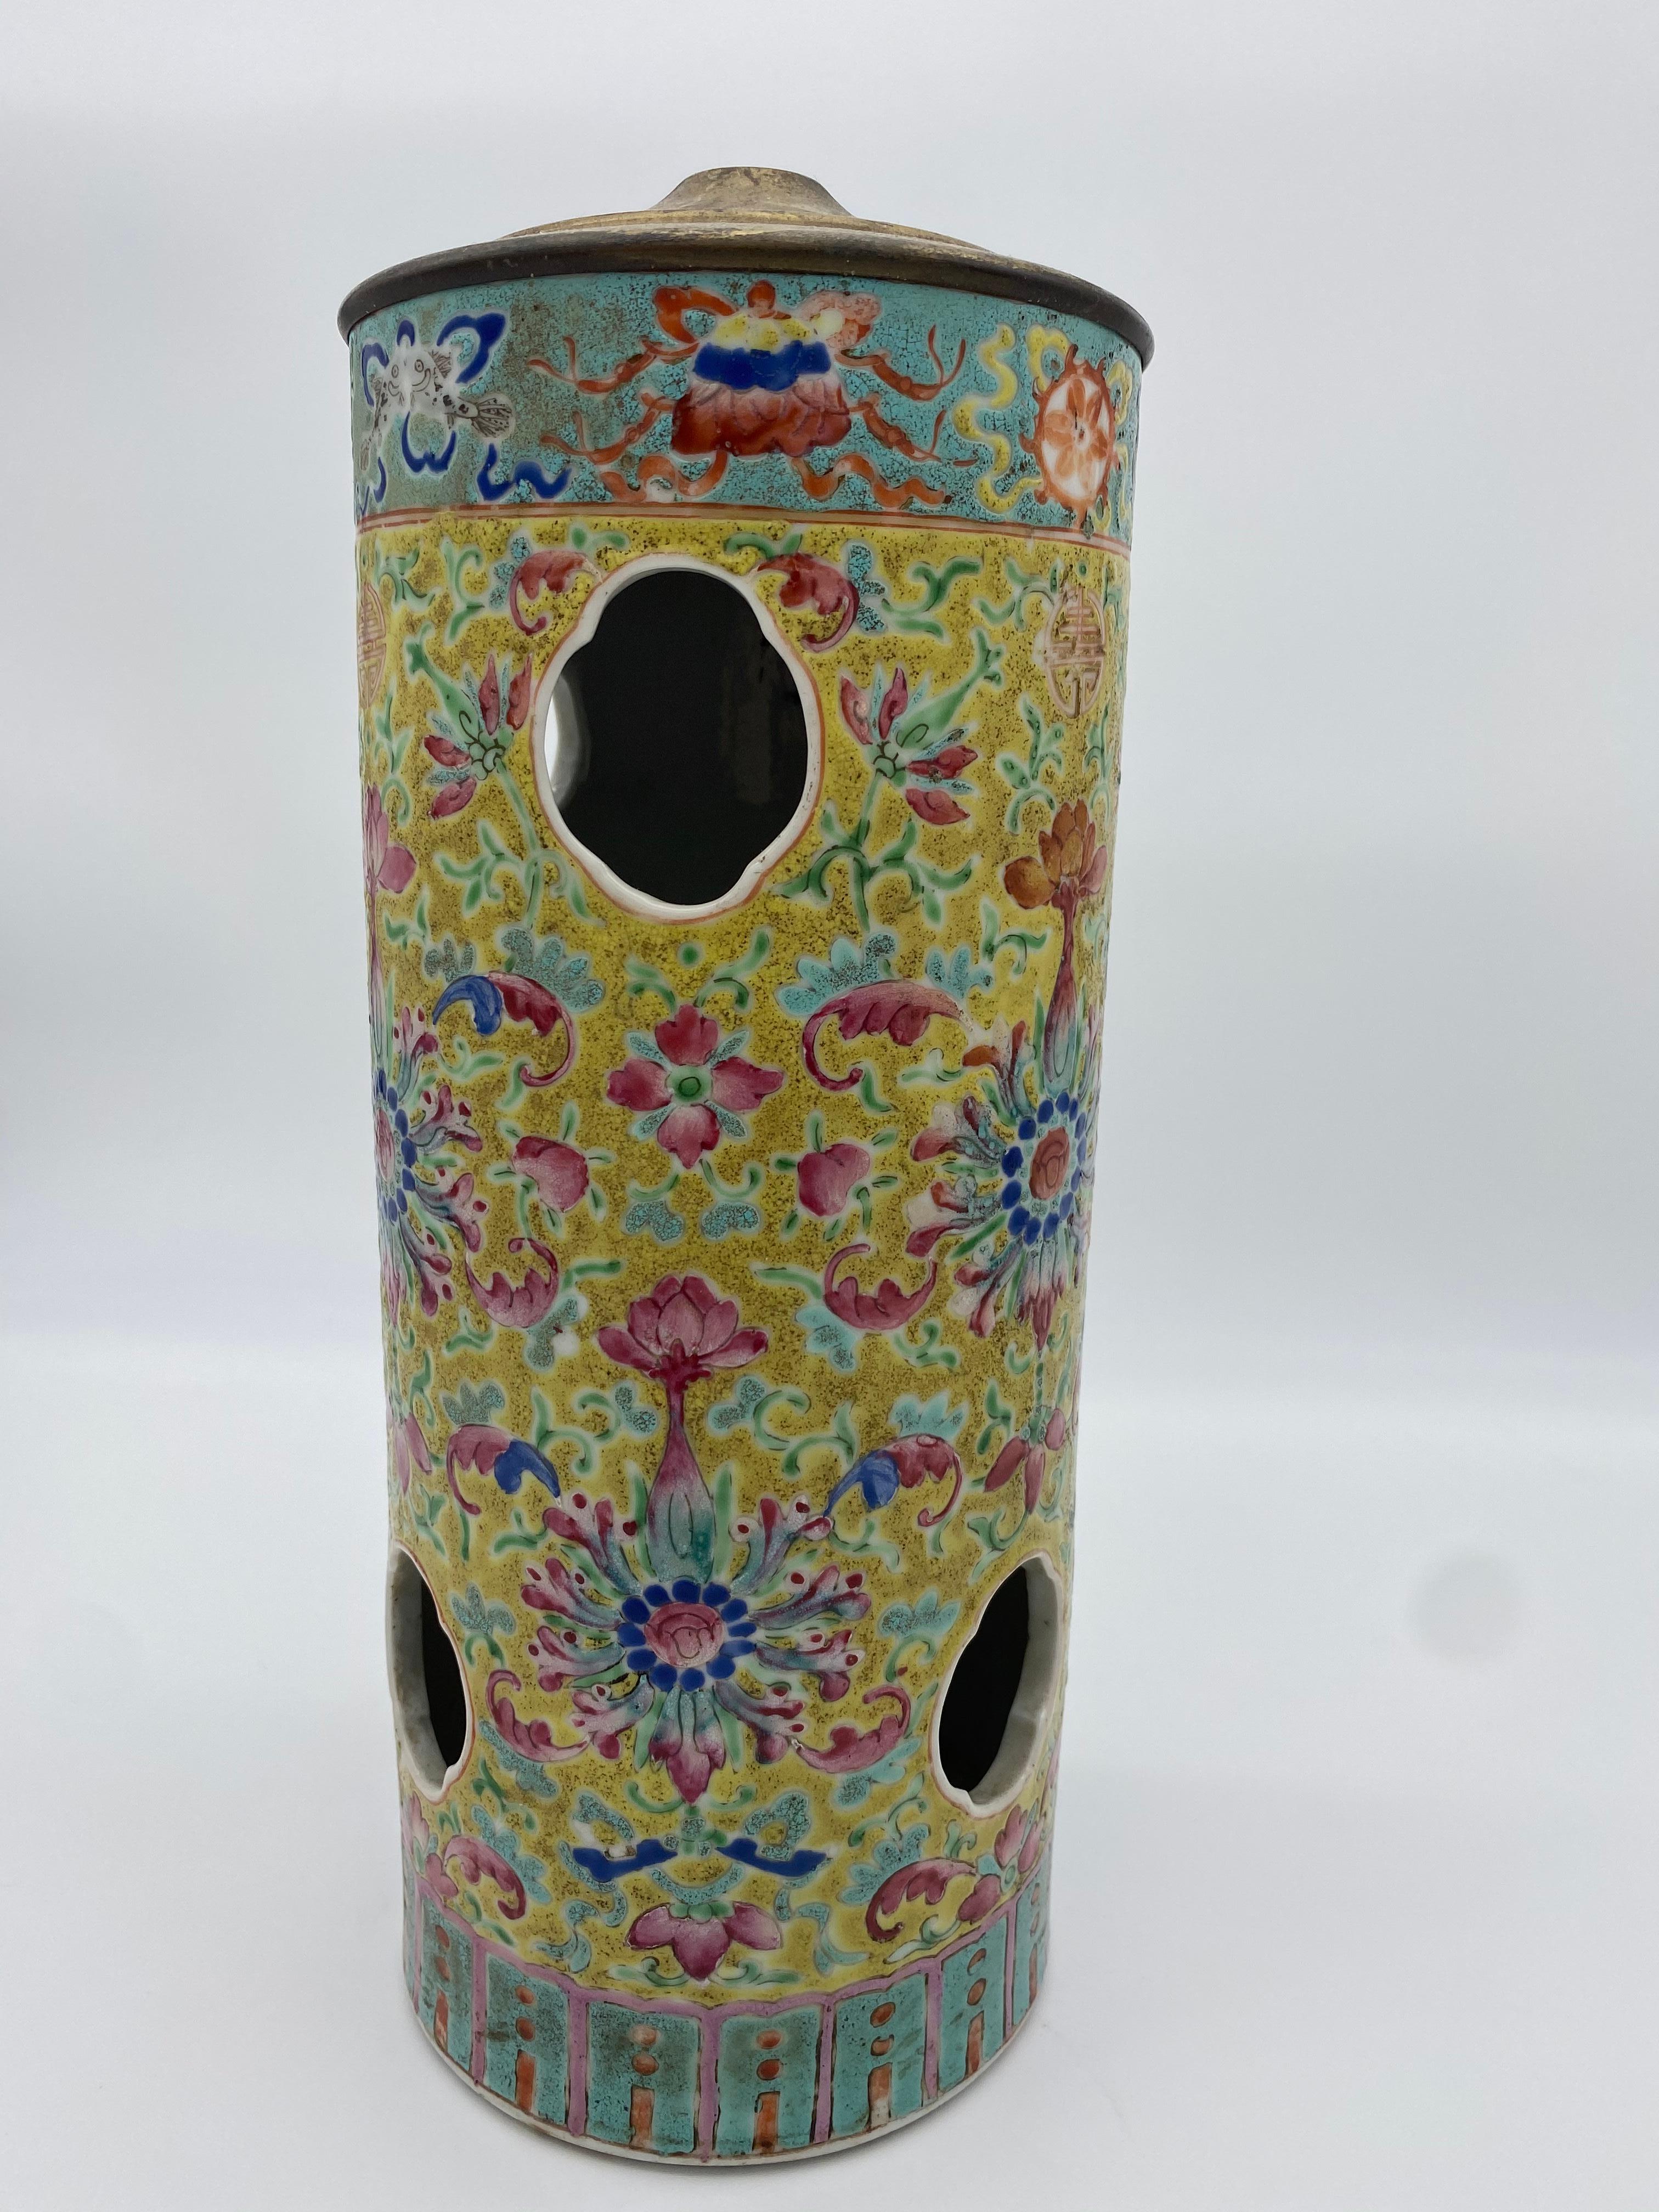 19th century antique Chinese porcelain hat stand. Derived from the period of the Qing Dynasty. Decorated in golden yellow background with red and blue flowers. Hole on the bottom can be used to convert hat stand into lamp.